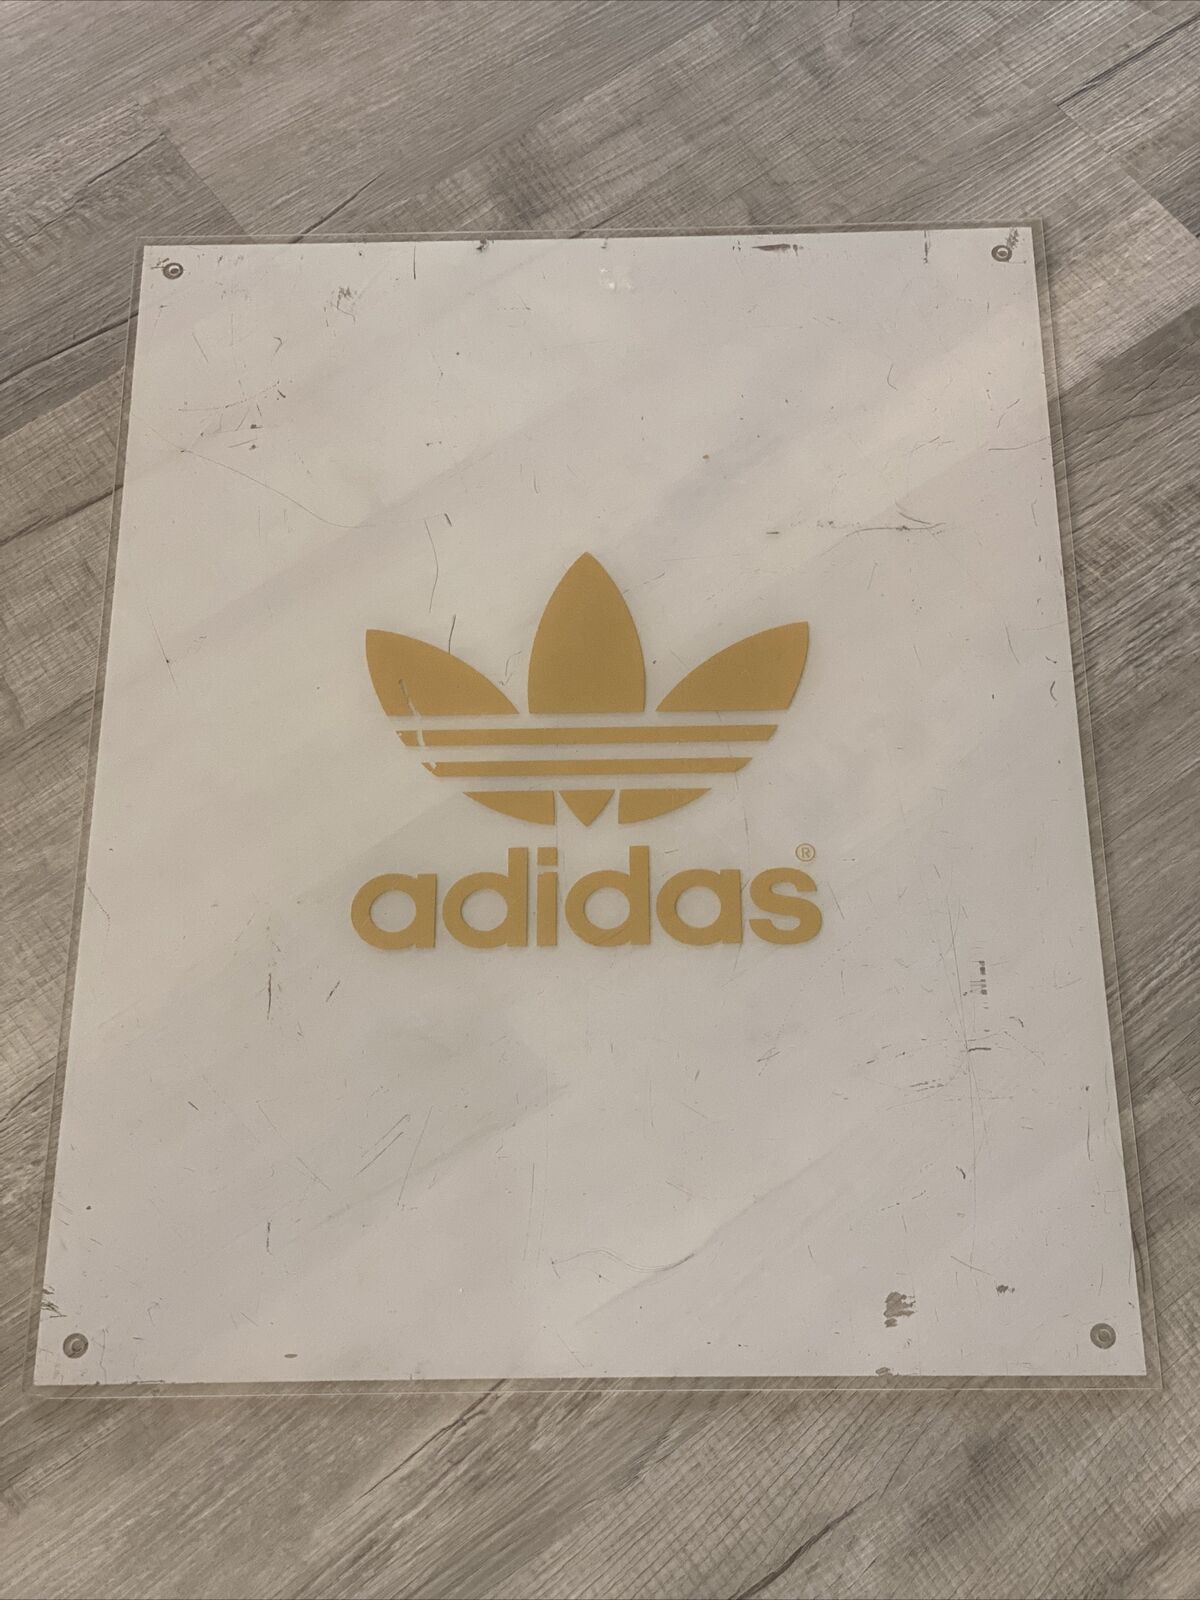 Adidas Store Large Advertising Hanging Display Single Sided Sports Trefoil 28”